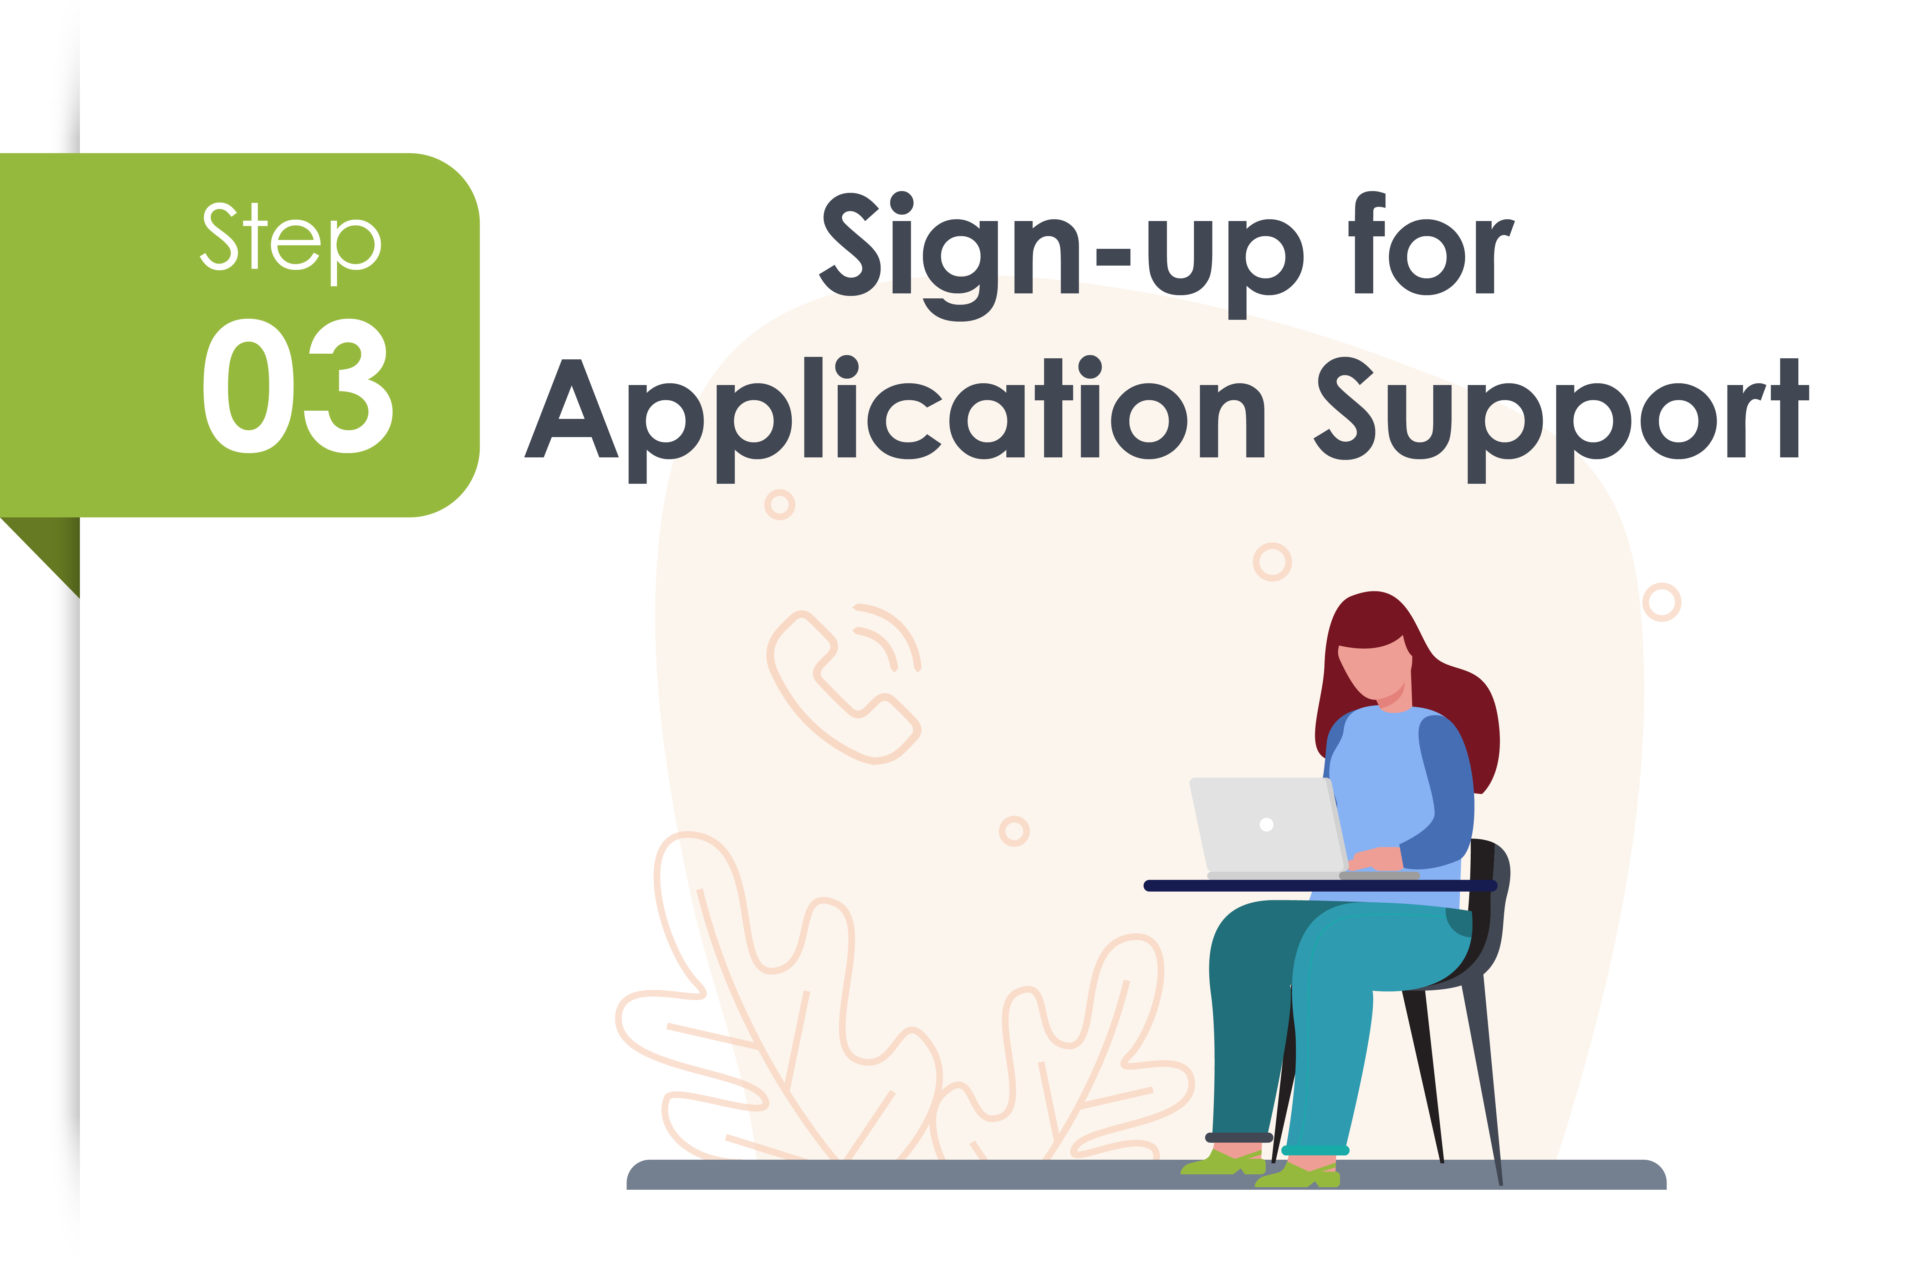 Step 3: Sign-up for an Application Orientation Meeting